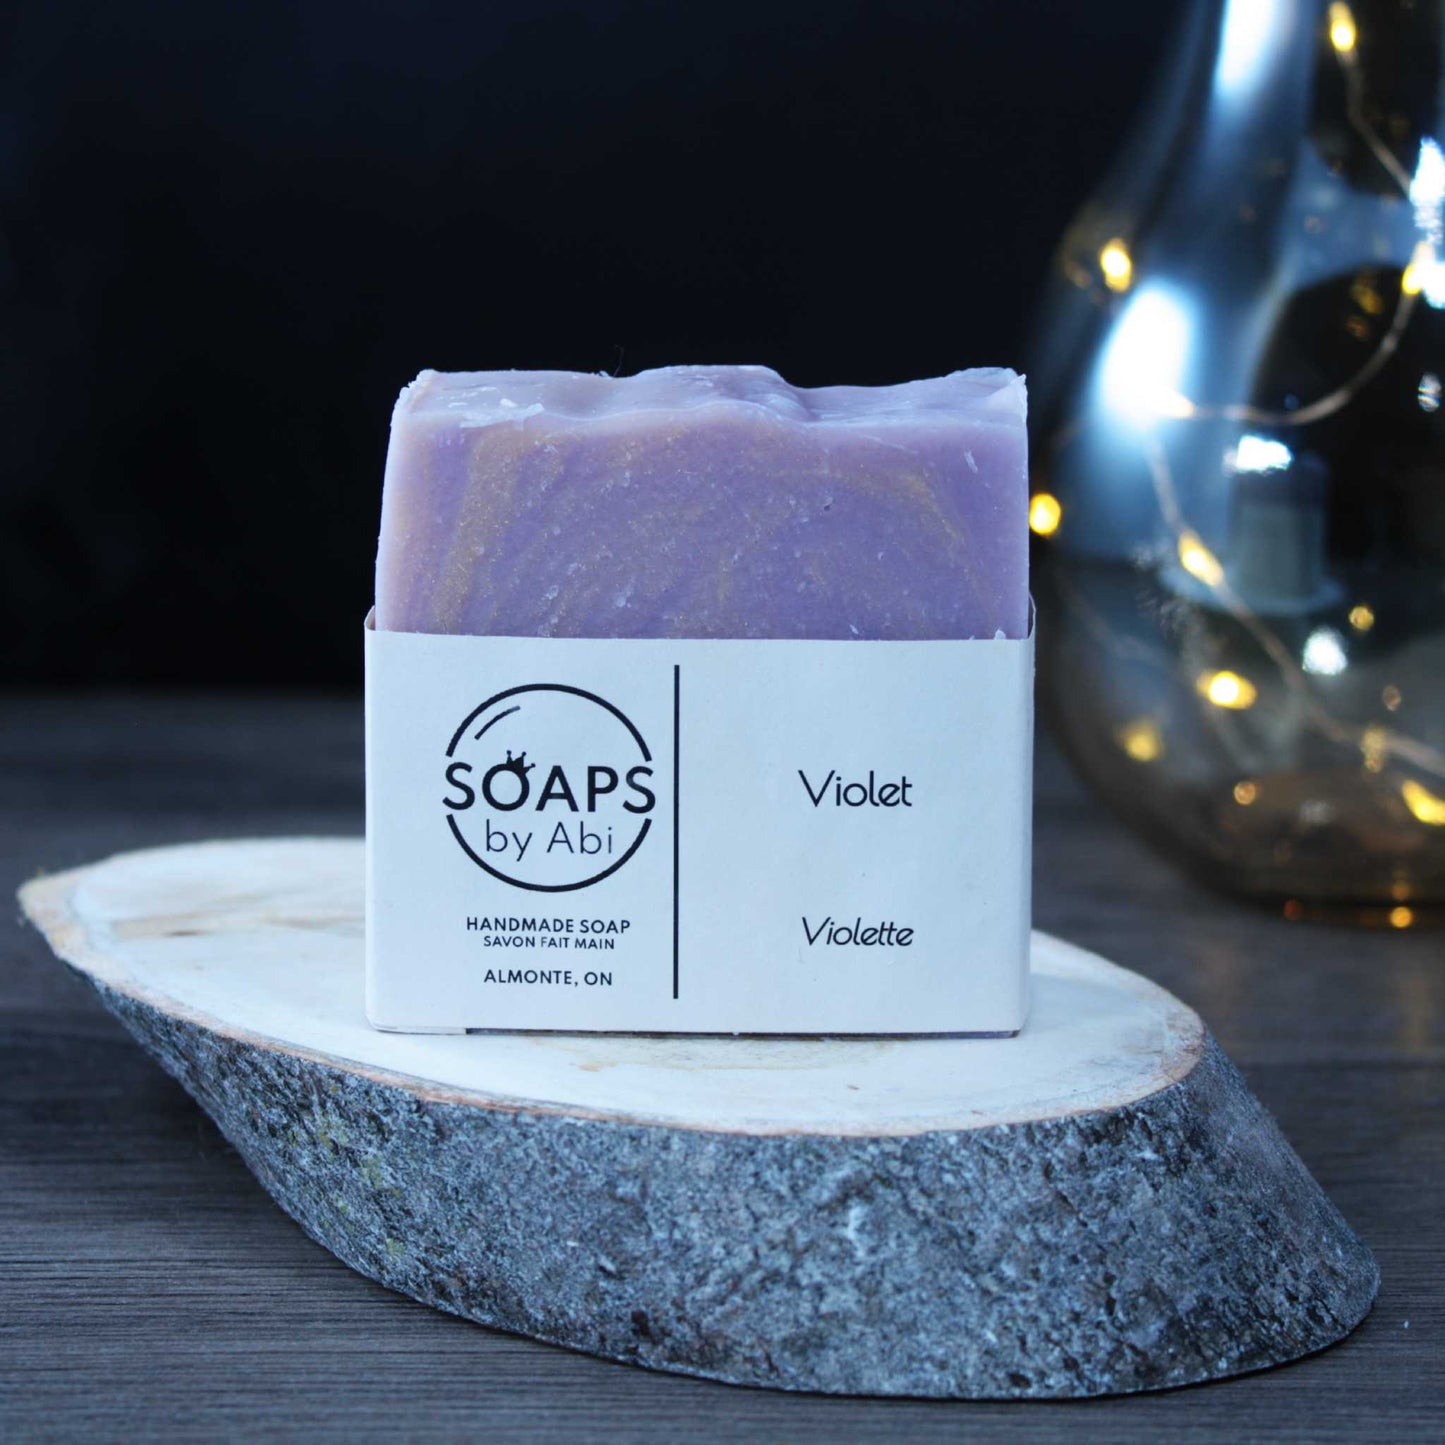 Violet soap Soaps by Abi homemade in almonte ontario